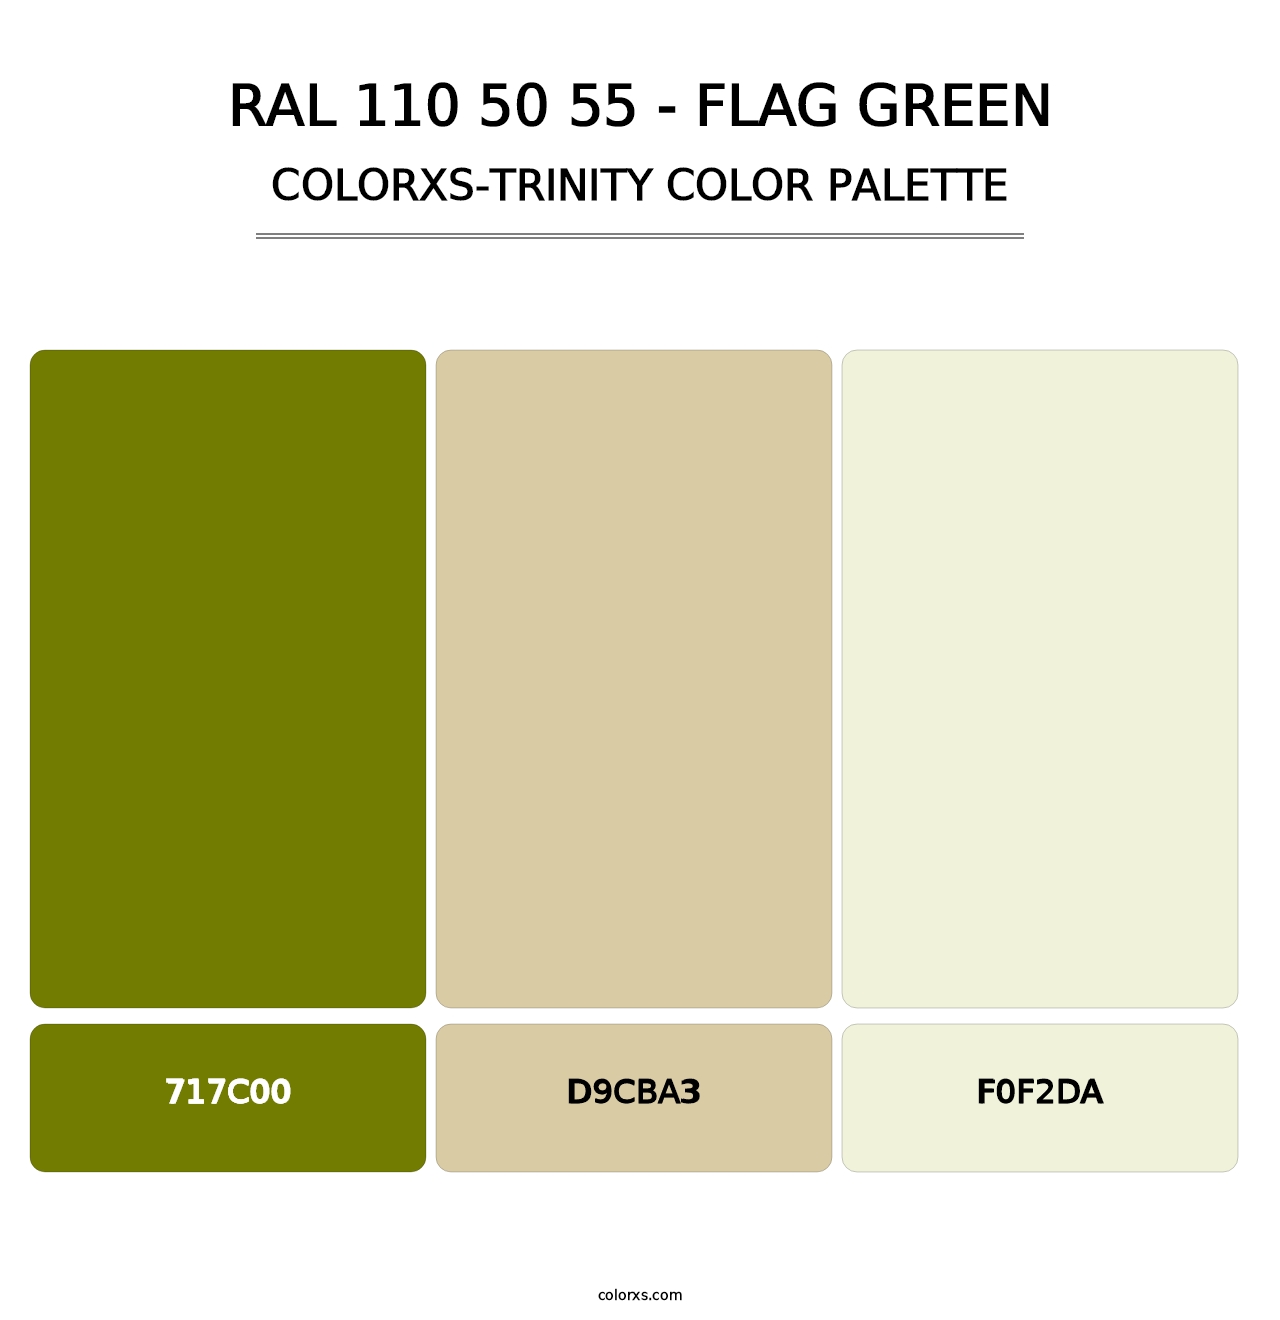 RAL 110 50 55 - Flag Green - Colorxs Trinity Palette